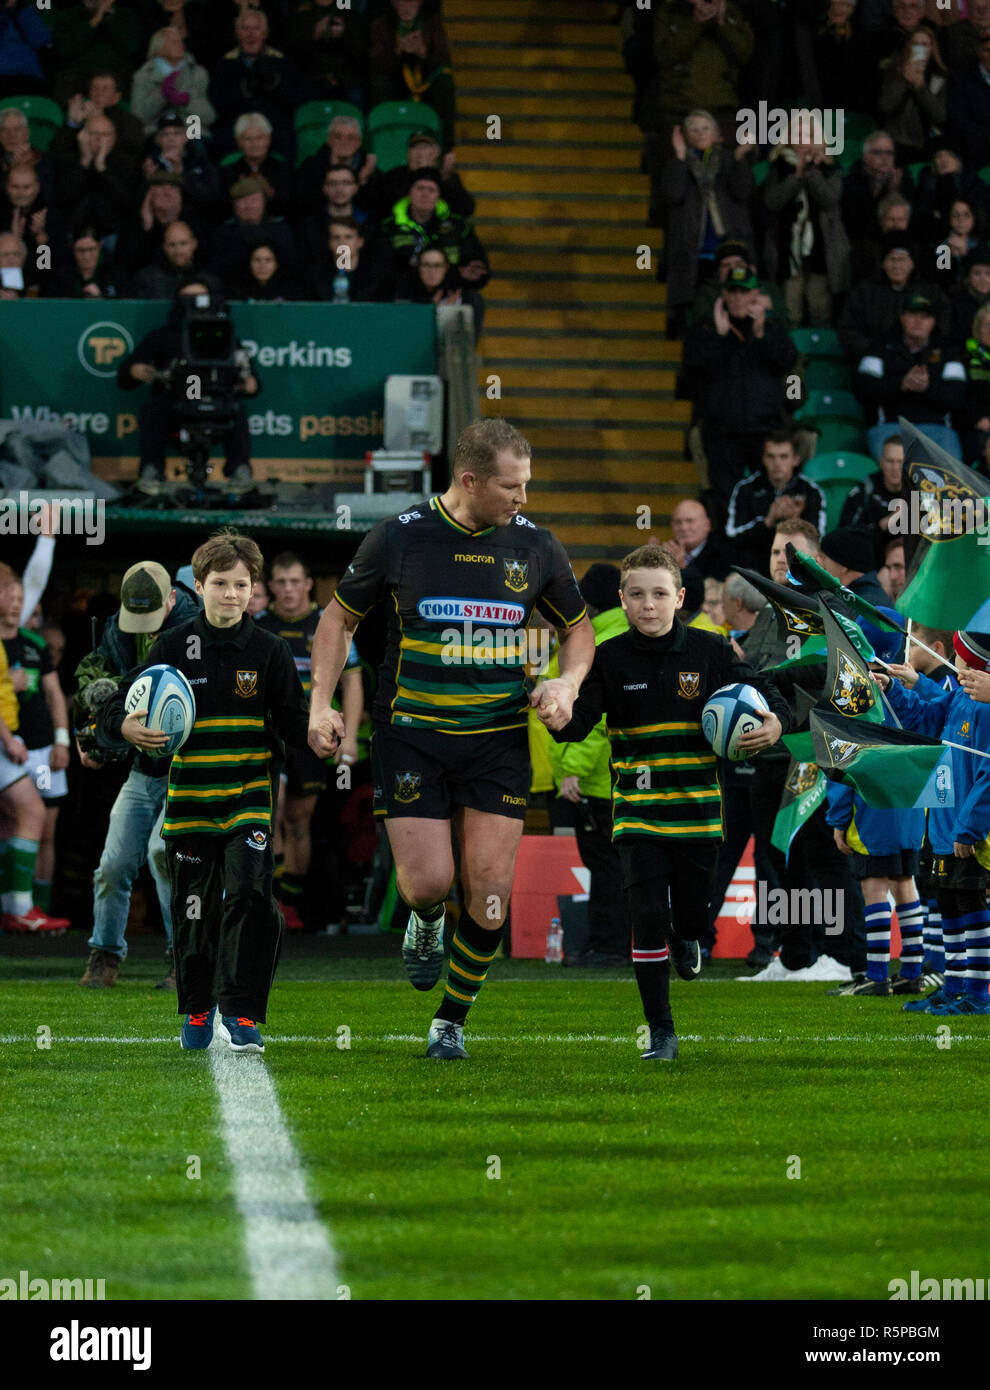 Northampton, UK. 1st December 2018. Dylan Hartley of Northampton Saints runs out for his 250th game ahead of the Gallagher Premiership Rugby match between Northampton Saints and Newcastle Falcons. Andrew Taylor/Alamy Live News Stock Photo